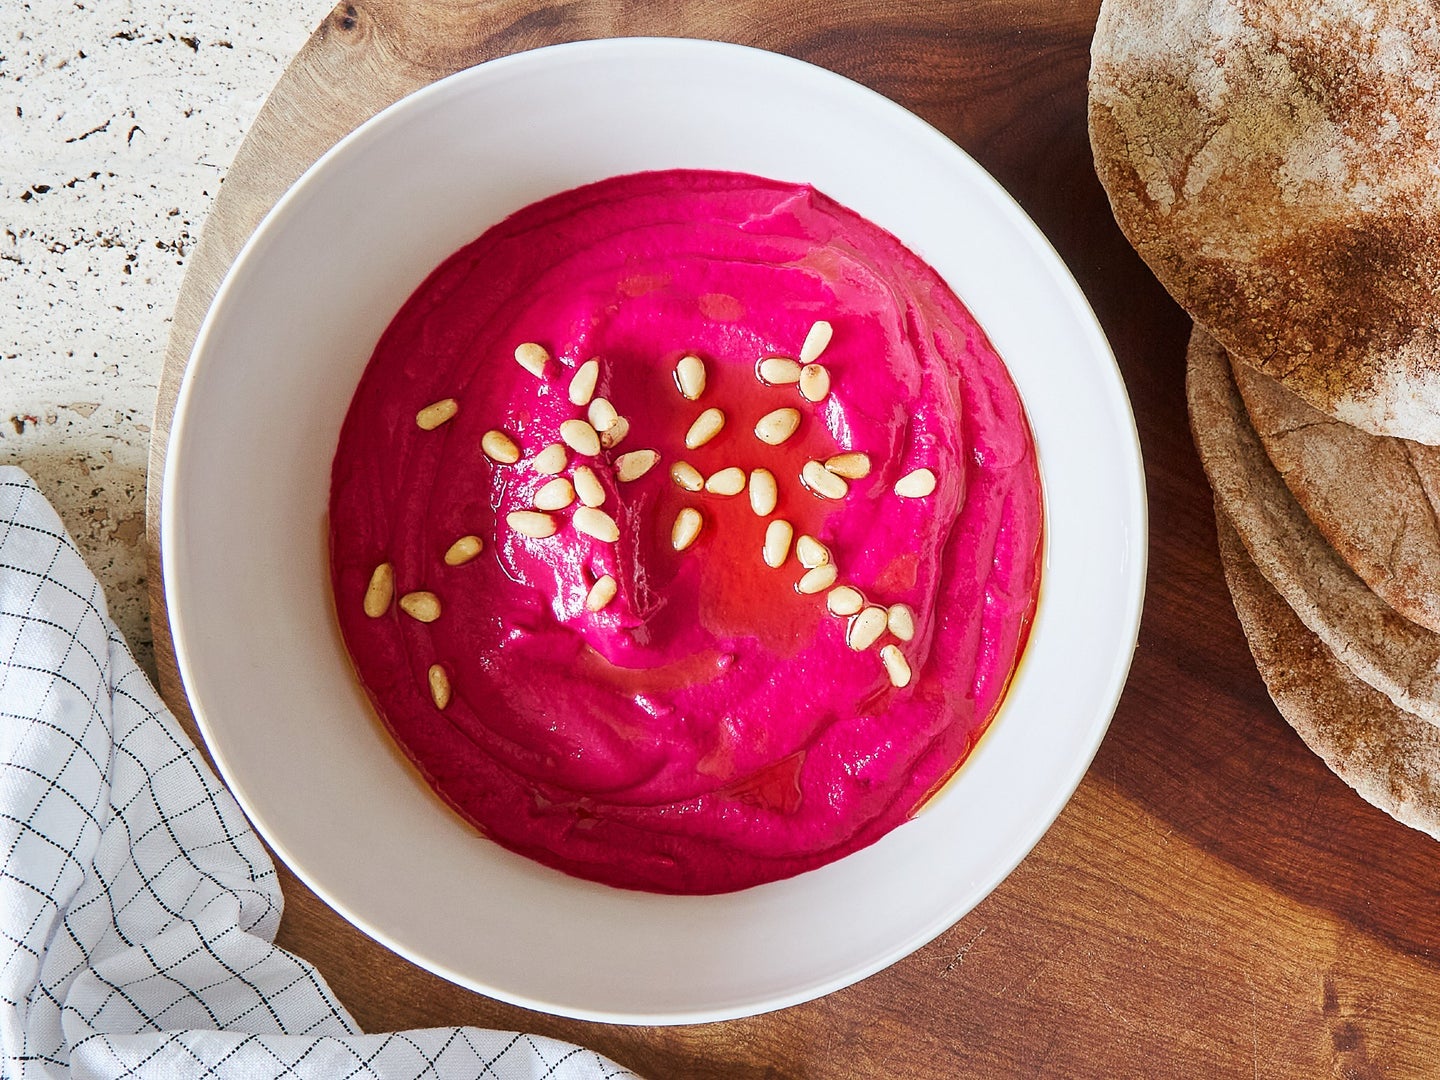 Tahini Beet Dip by Suzanne Zeidy